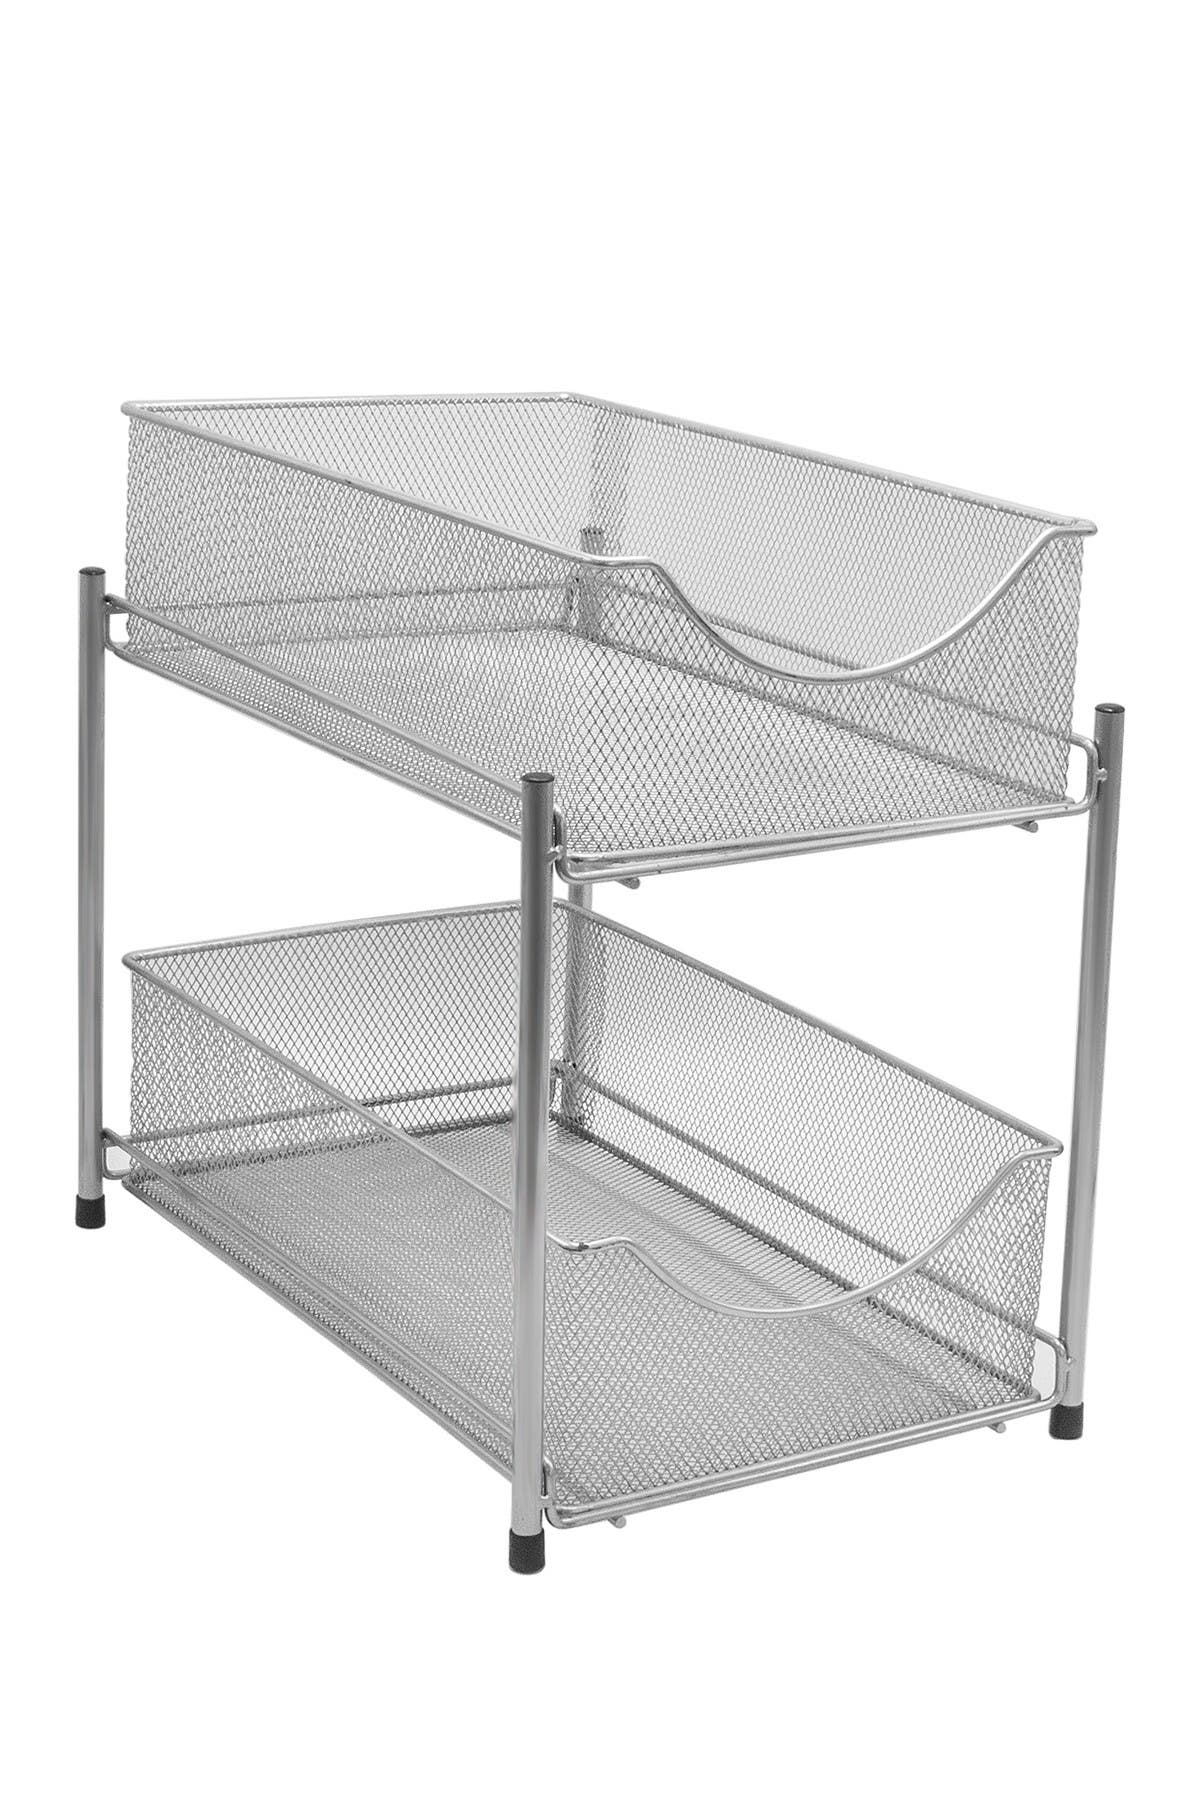 Brown FlagShip 3 Tier Crystal Tempered Glass Pull-Out Organizer Baskets with Mesh Sliding Drawers 